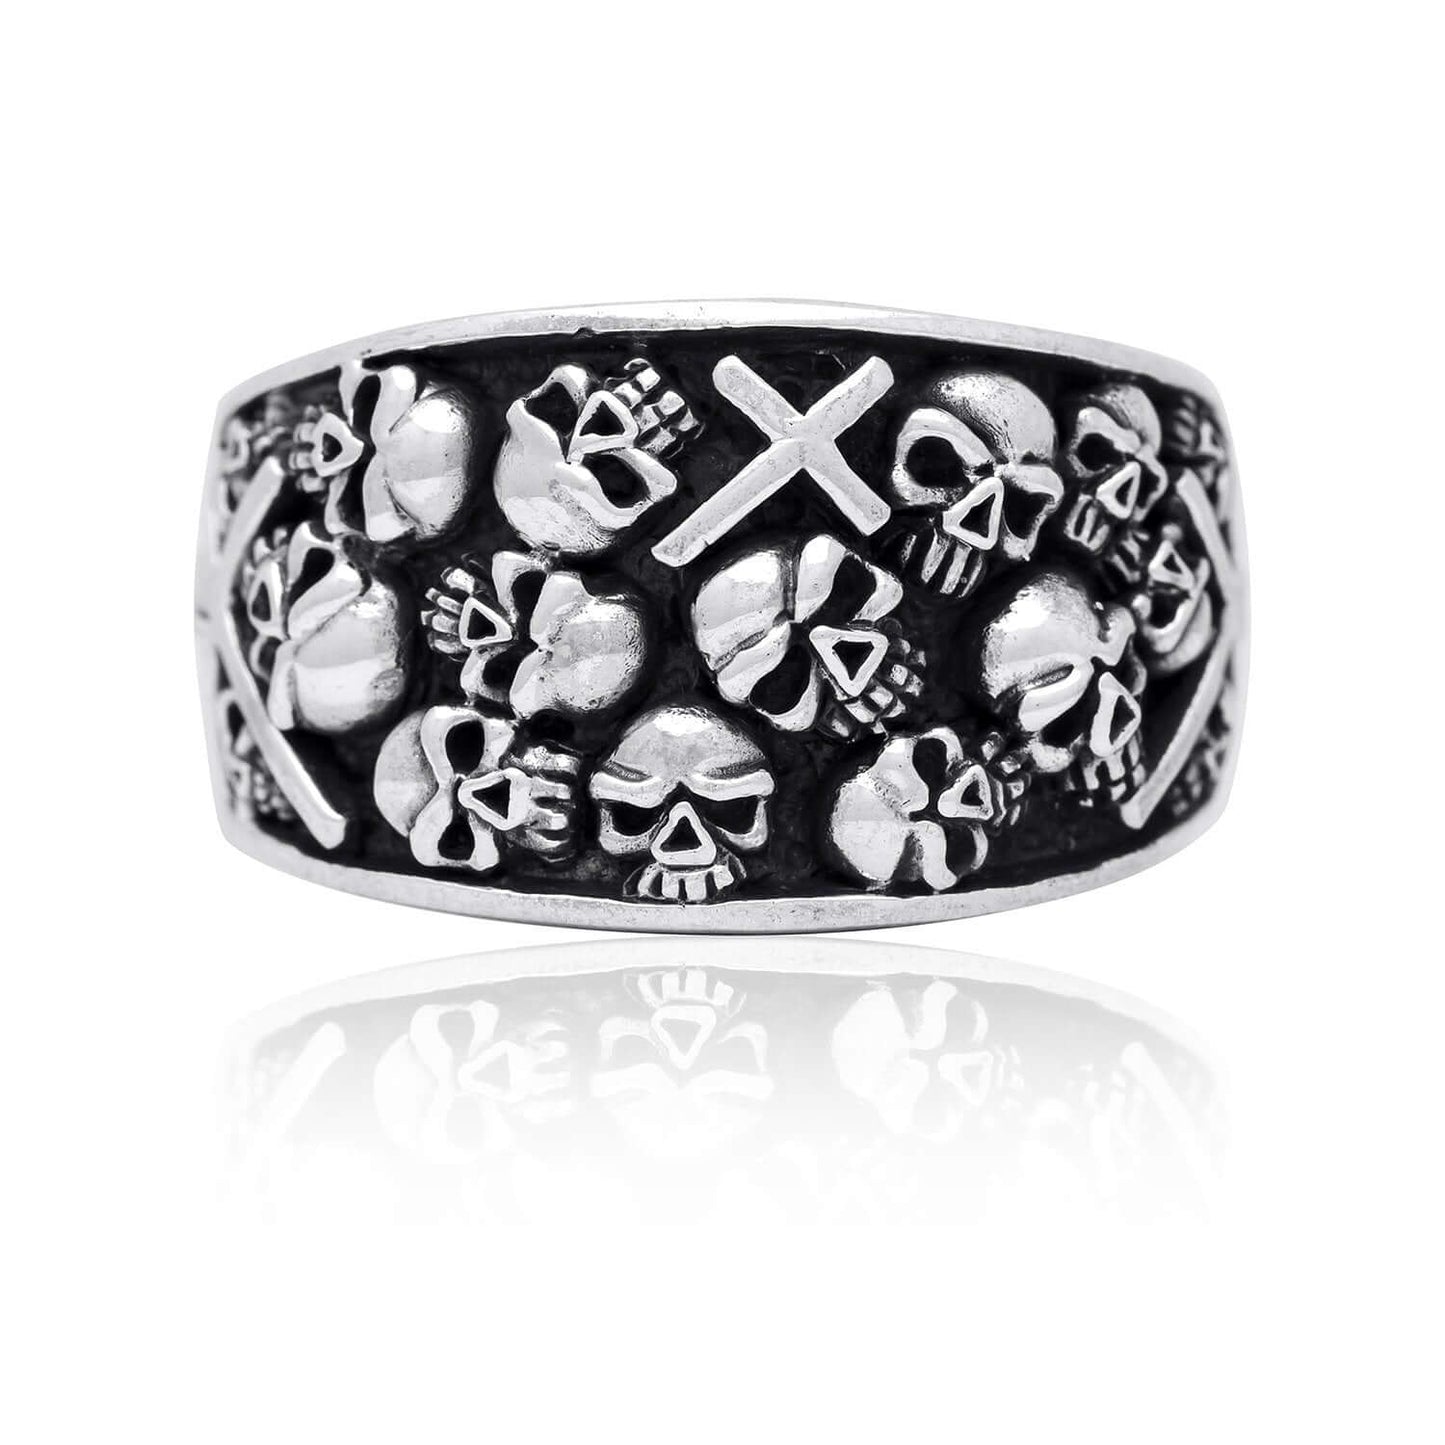 925 Sterling Silver Handcrafted Skulls Cross Gothic Biker Ring - SilverMania925